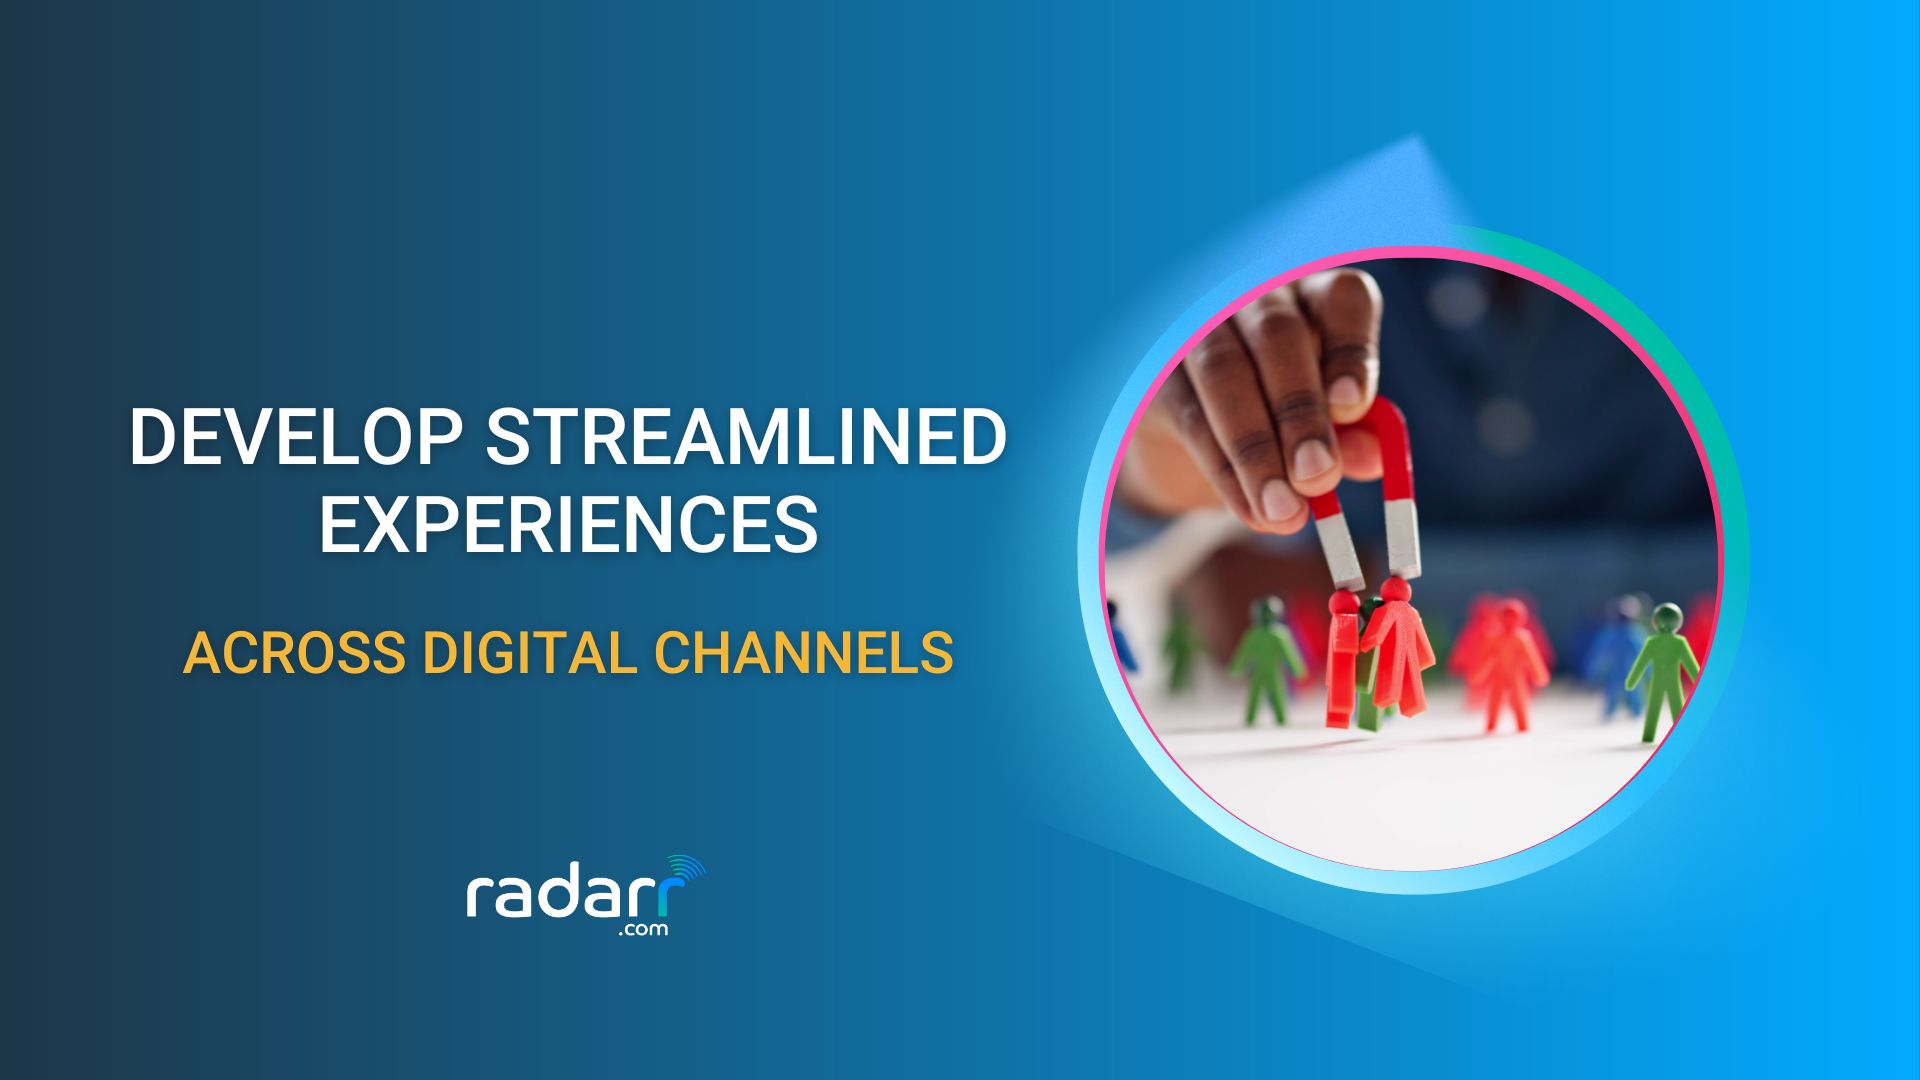 How to Develop Consistent, Streamlined Experiences Across Digital Channels